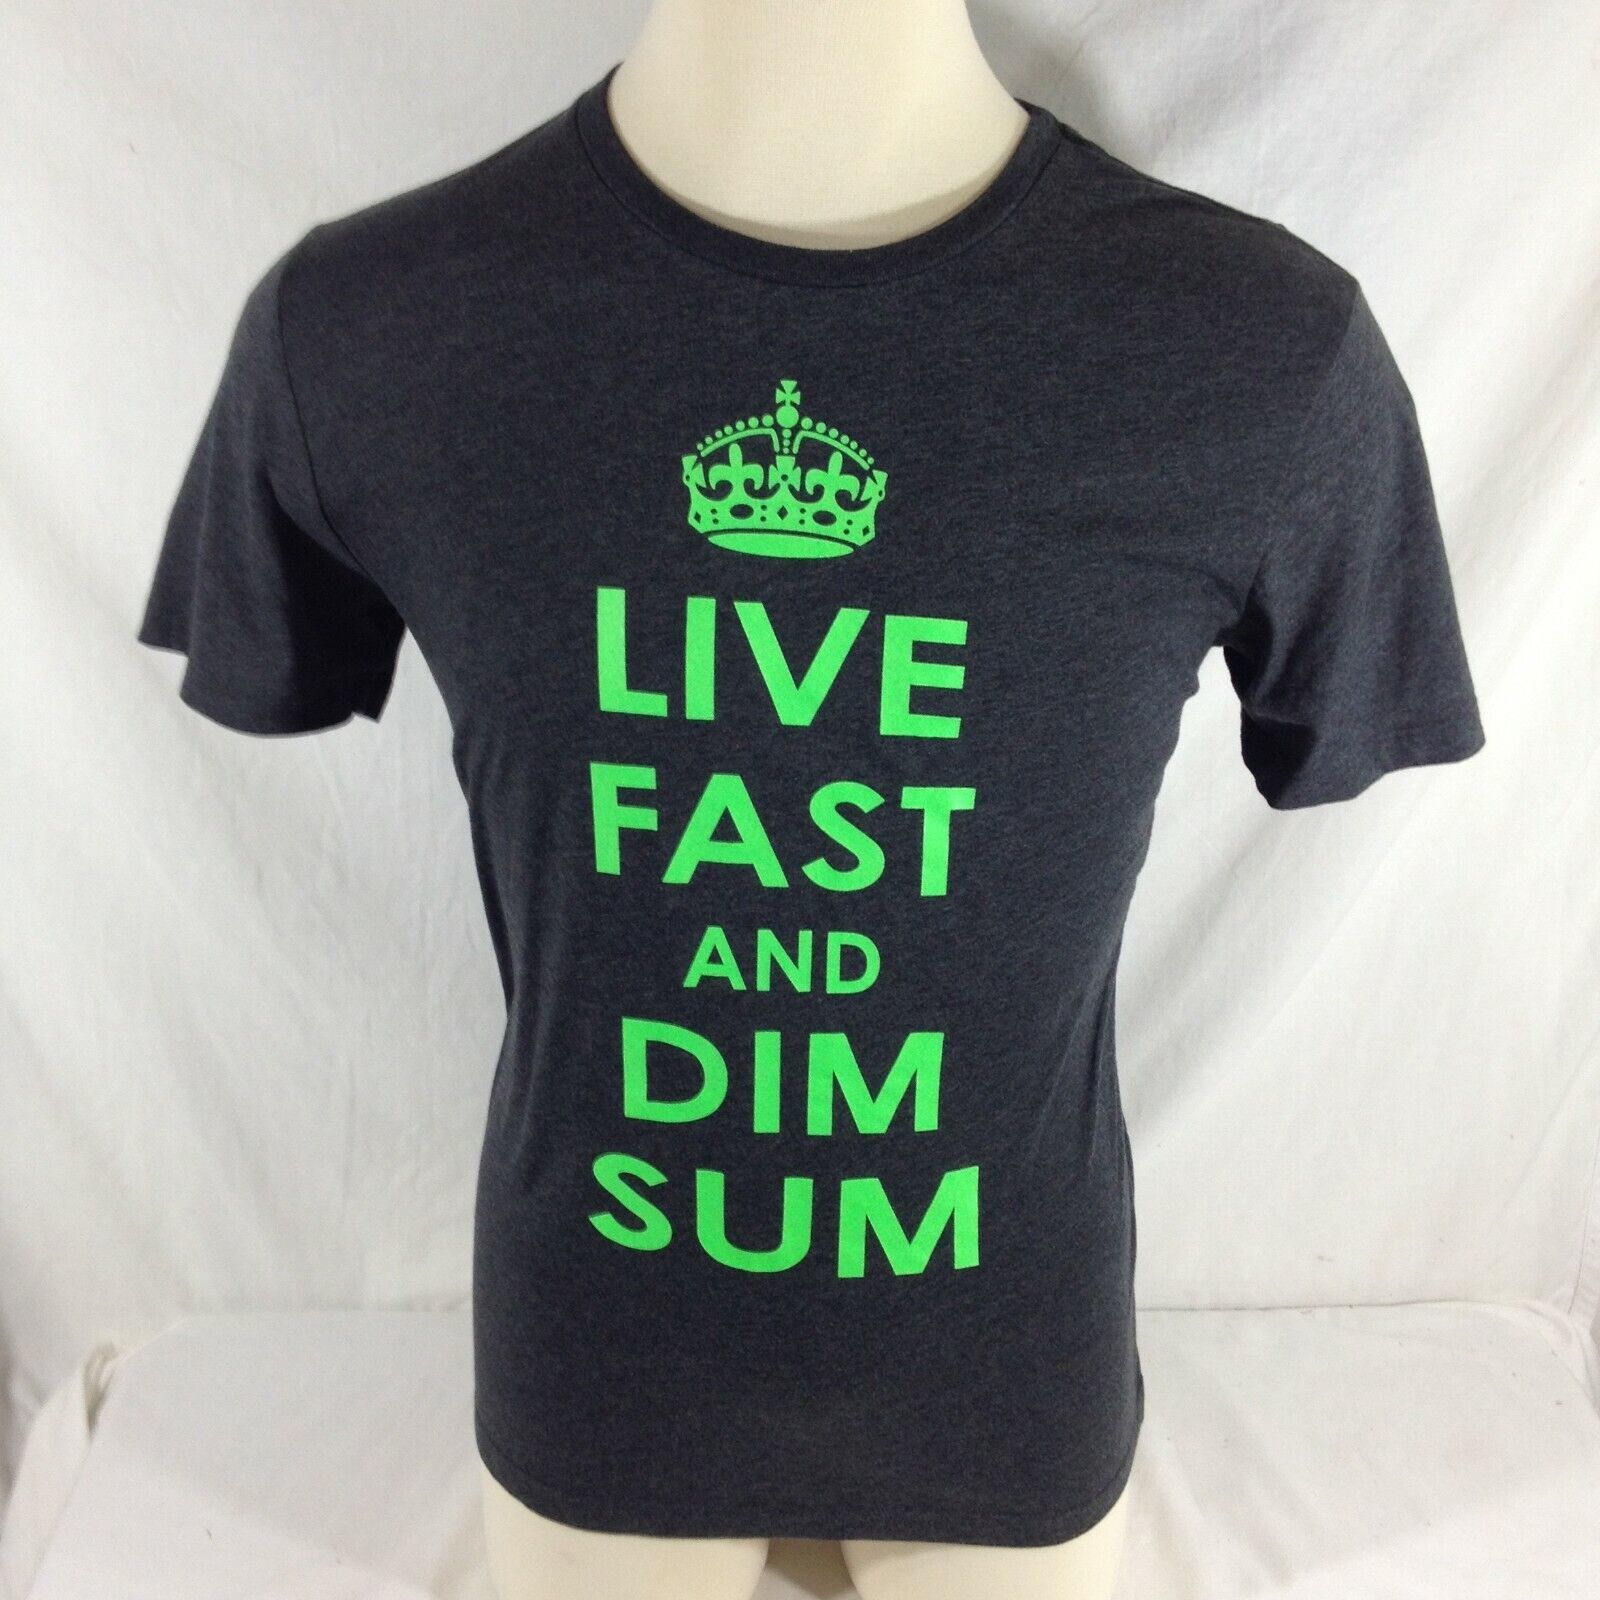 Primary image for 21 Men by Forever 21 "Live Fast and Dim Sum" Black Tee Shirt Men’s Size Large